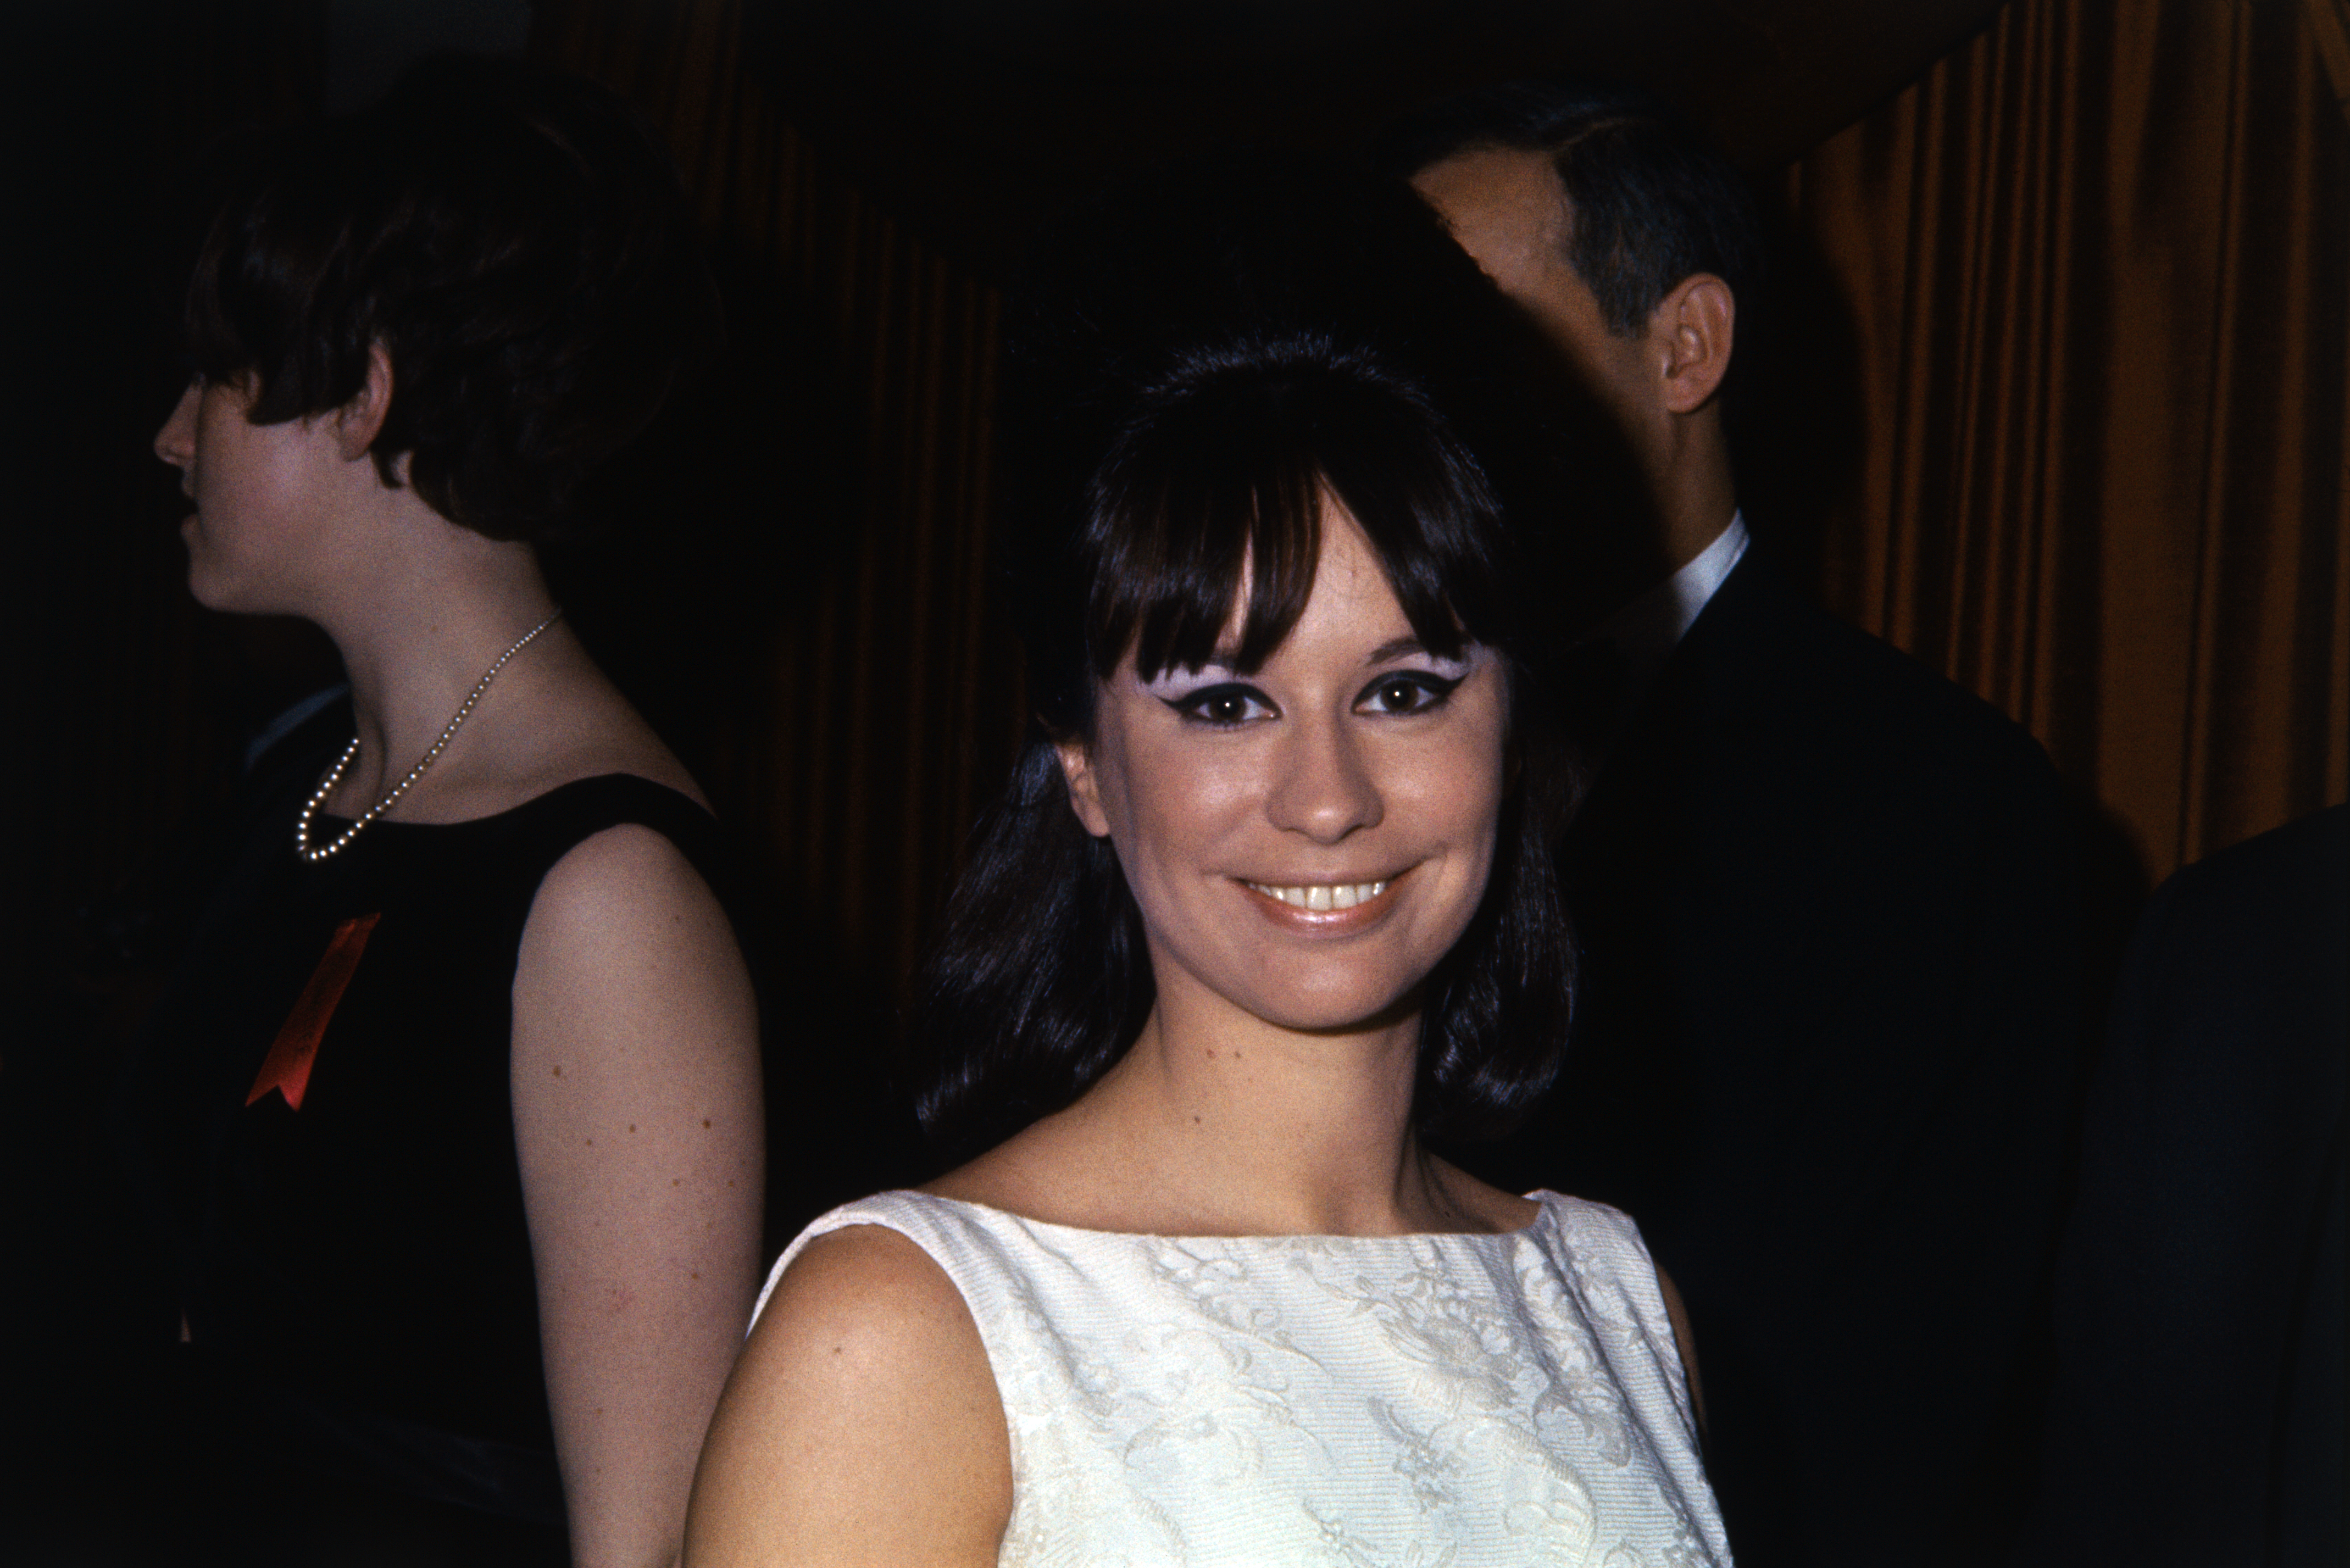 Astrud Gilberto attends the Grammy Awards dinner presented by the New York chapter of the National Academy of Recording Arts and Sciences in 1966 in New York. | Source: Getty Images